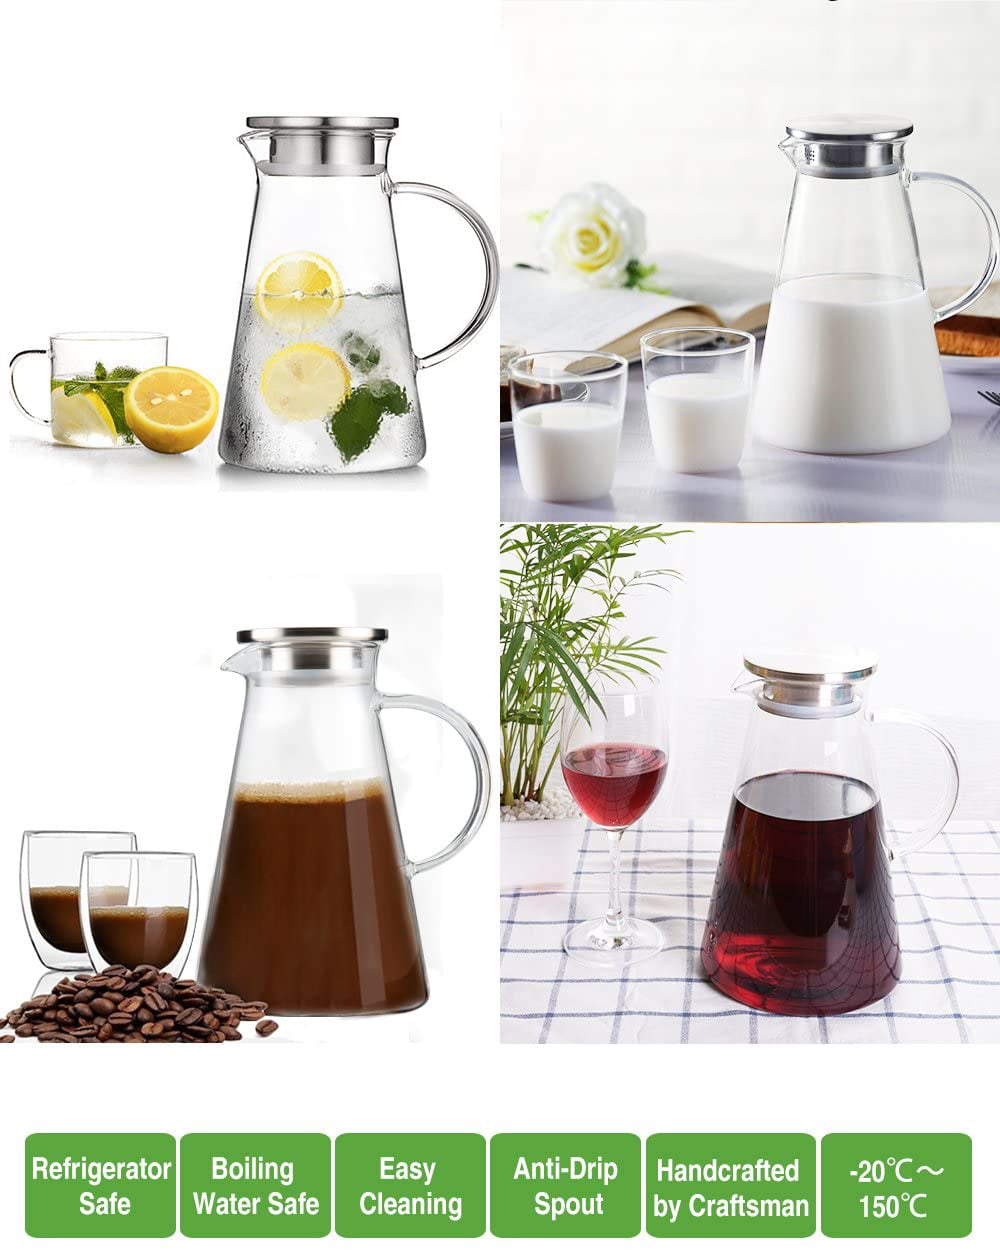 1.6 Liter 54 oz Glass Pitcher with Lid and Spout, Bivvclaz Glass Water  Pitcher for Fridge, Glass Carafe for Hot/Cold Water, Iced Tea Pitcher,  Drink